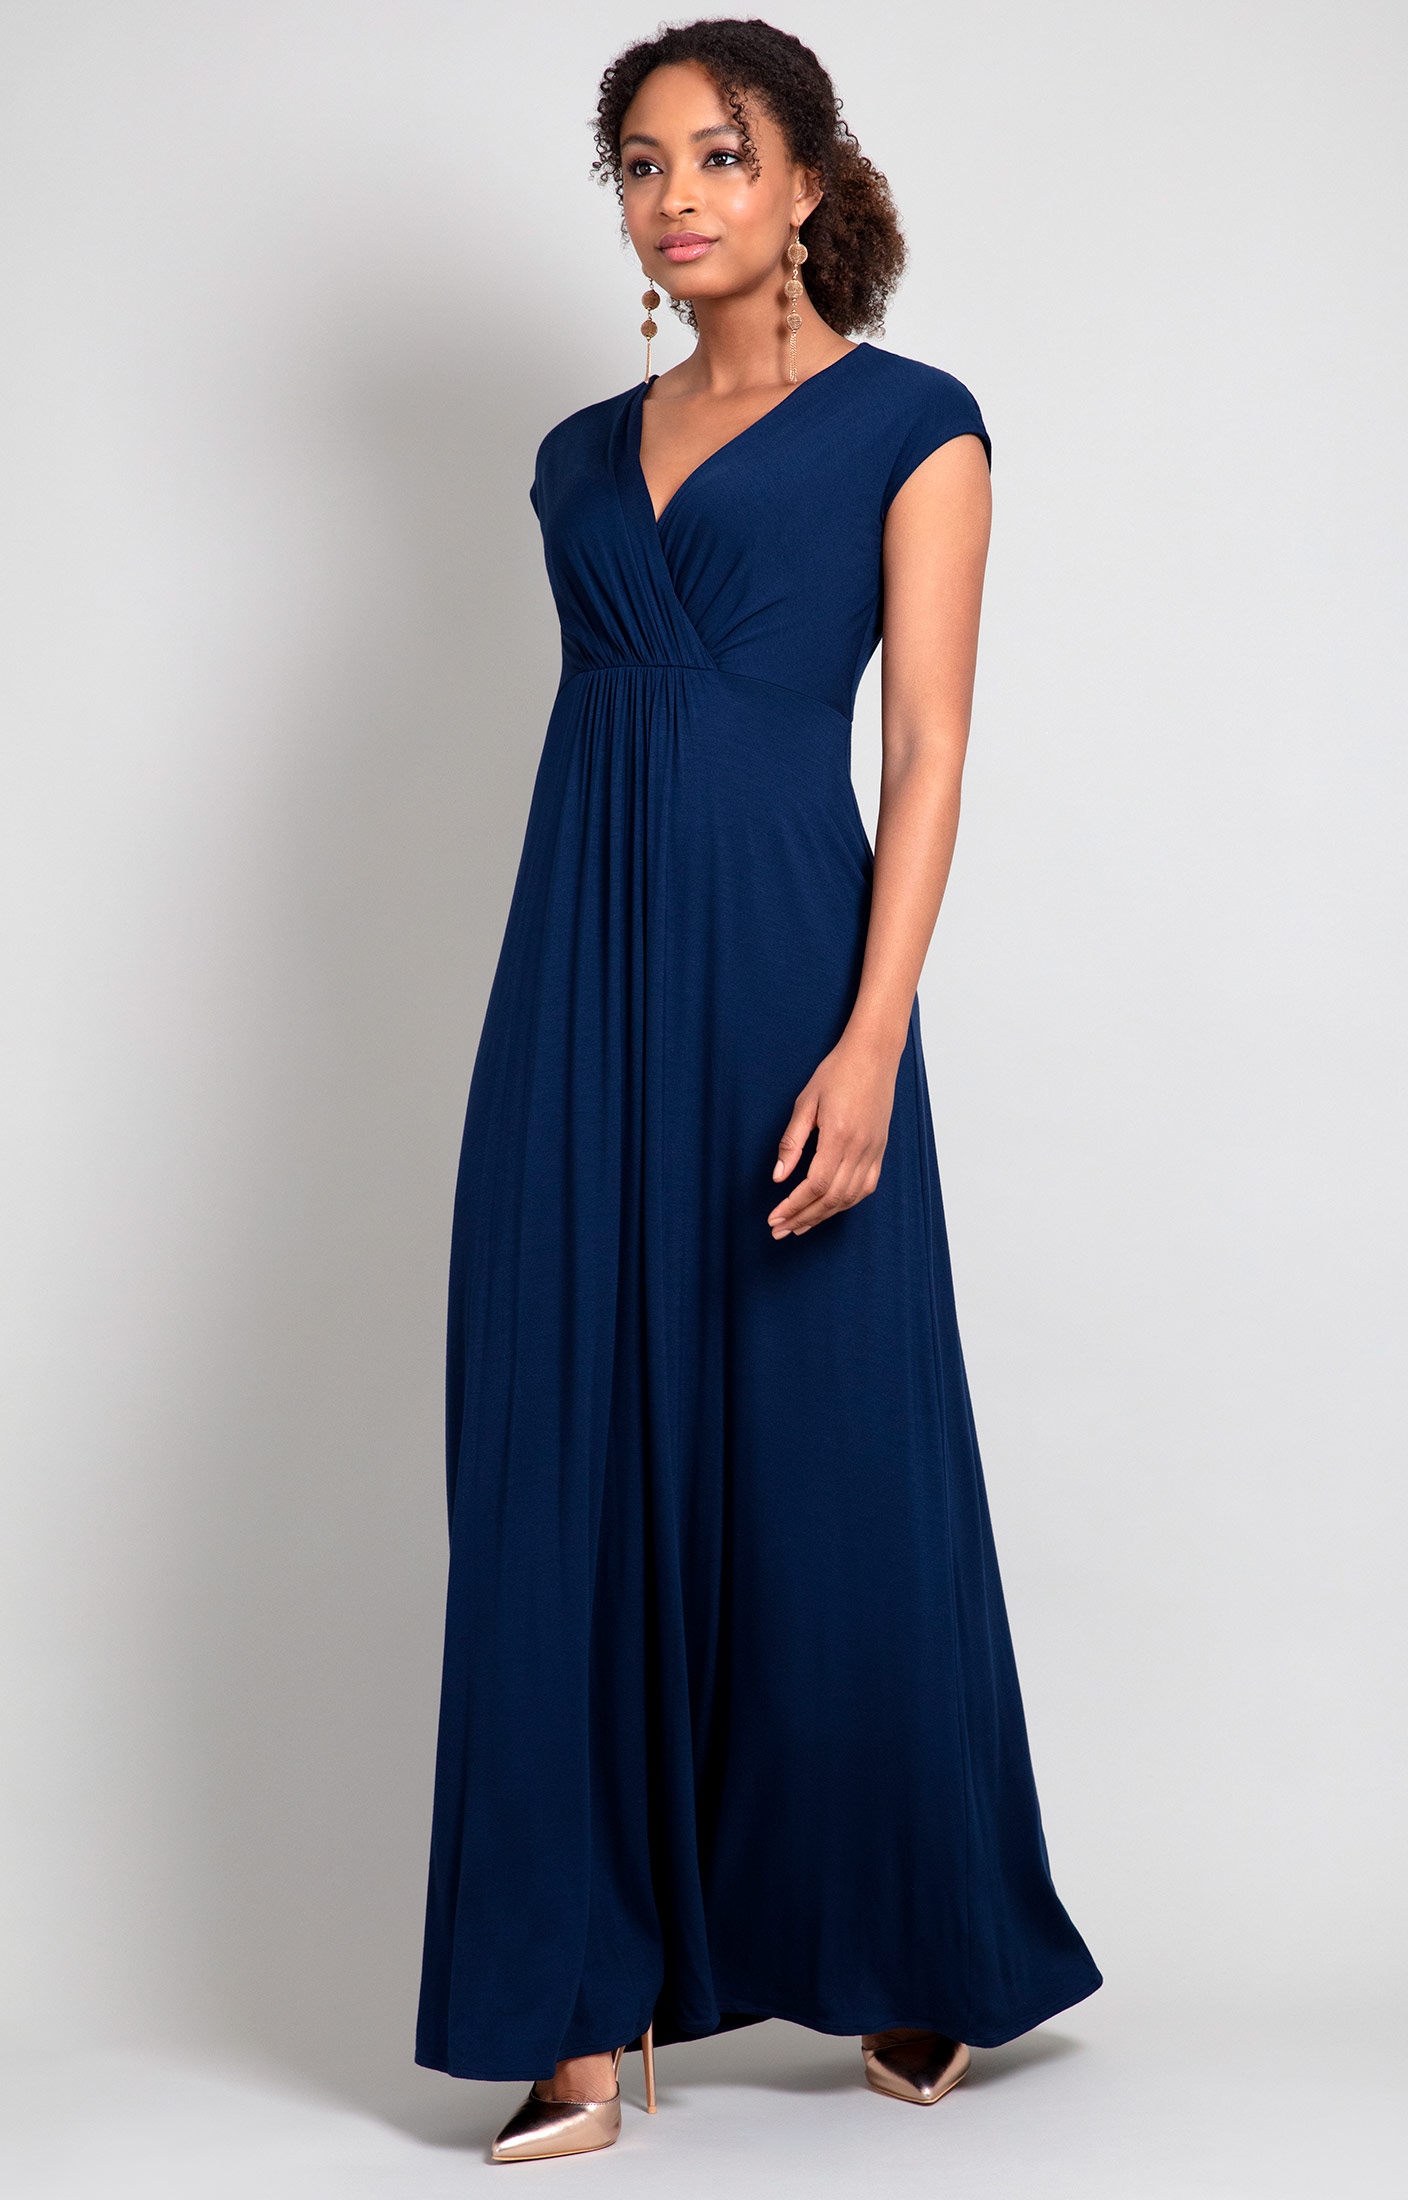 Waterfall Dress Navy - Wedding Dresses, Evening Wear and Party Clothes by  Alie Street.